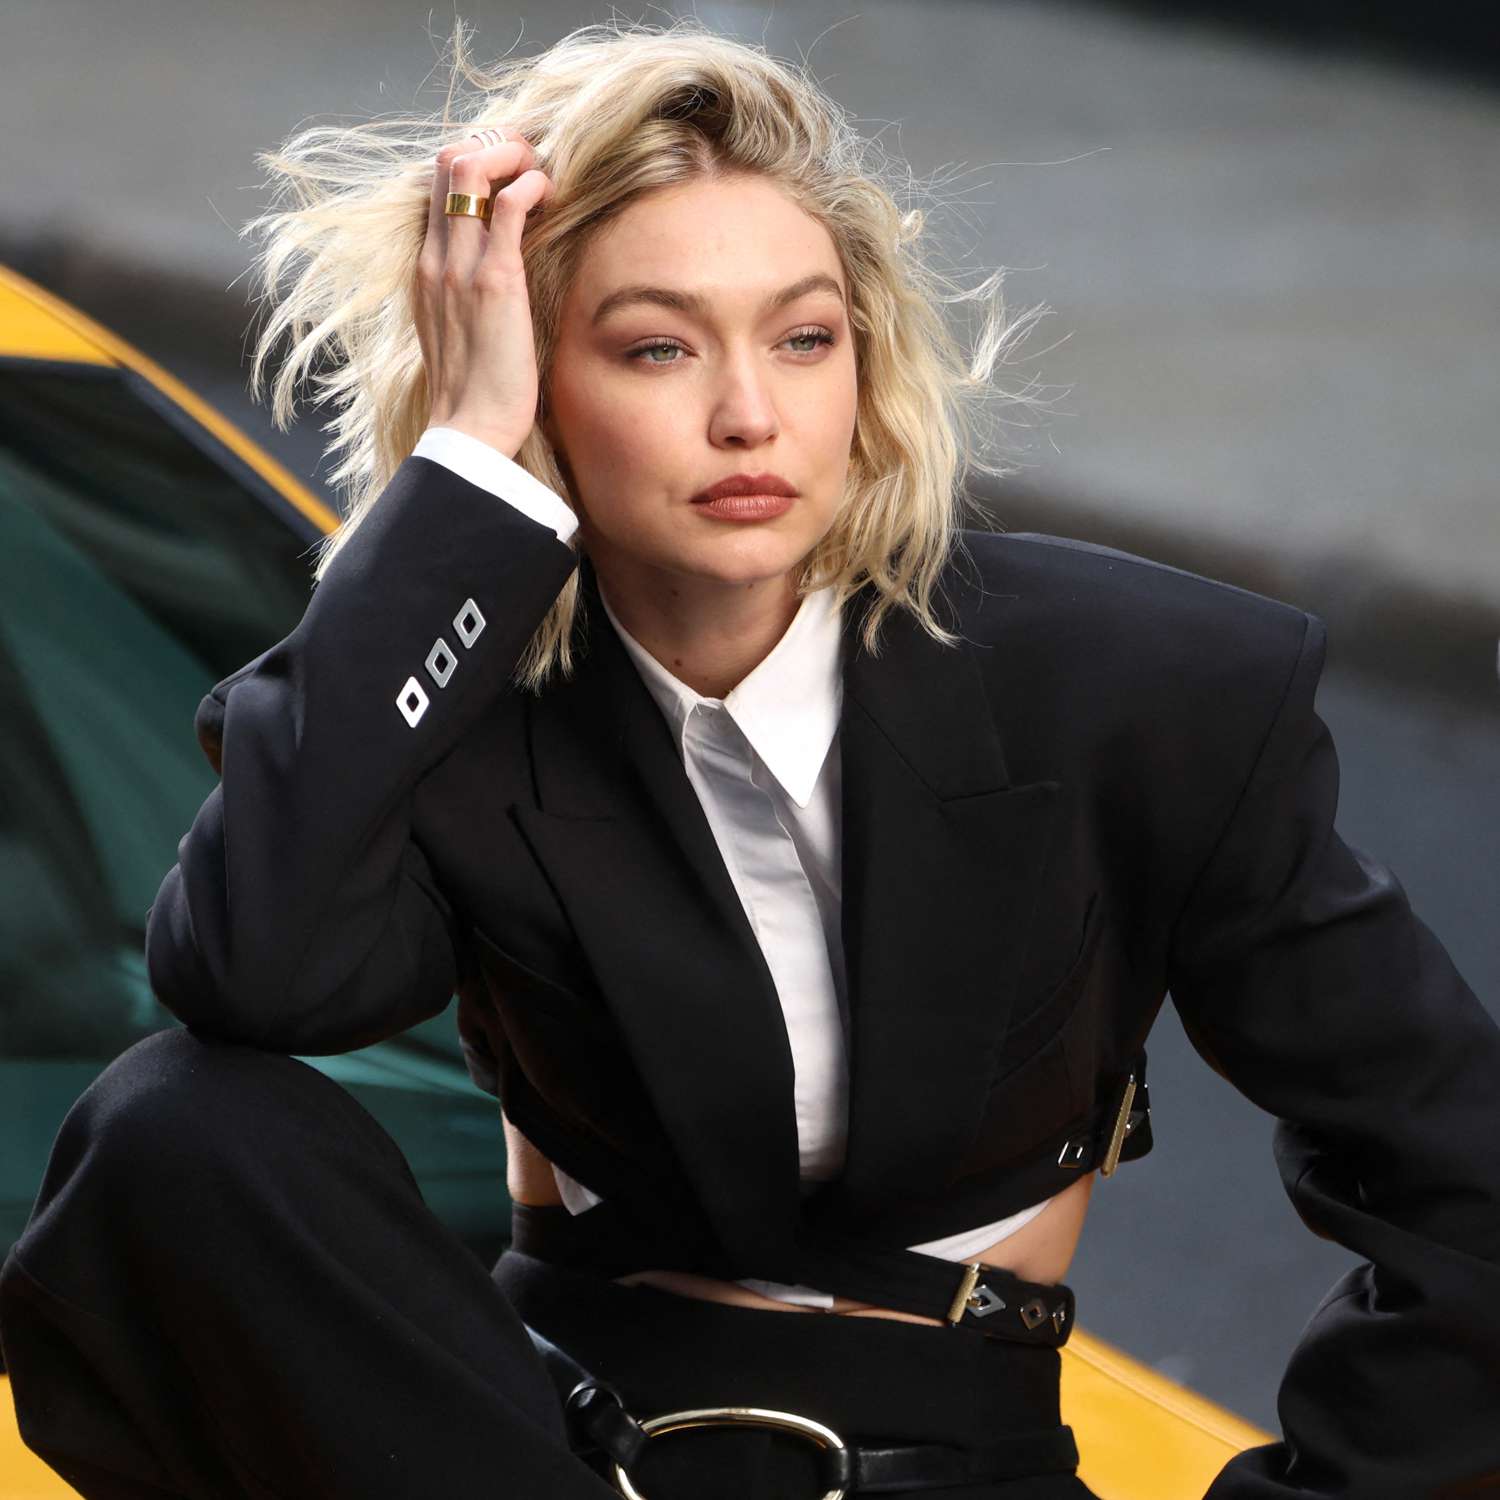 Gigi Hadid spotted on set doing a shooting for Maybelline in Soho, New York.